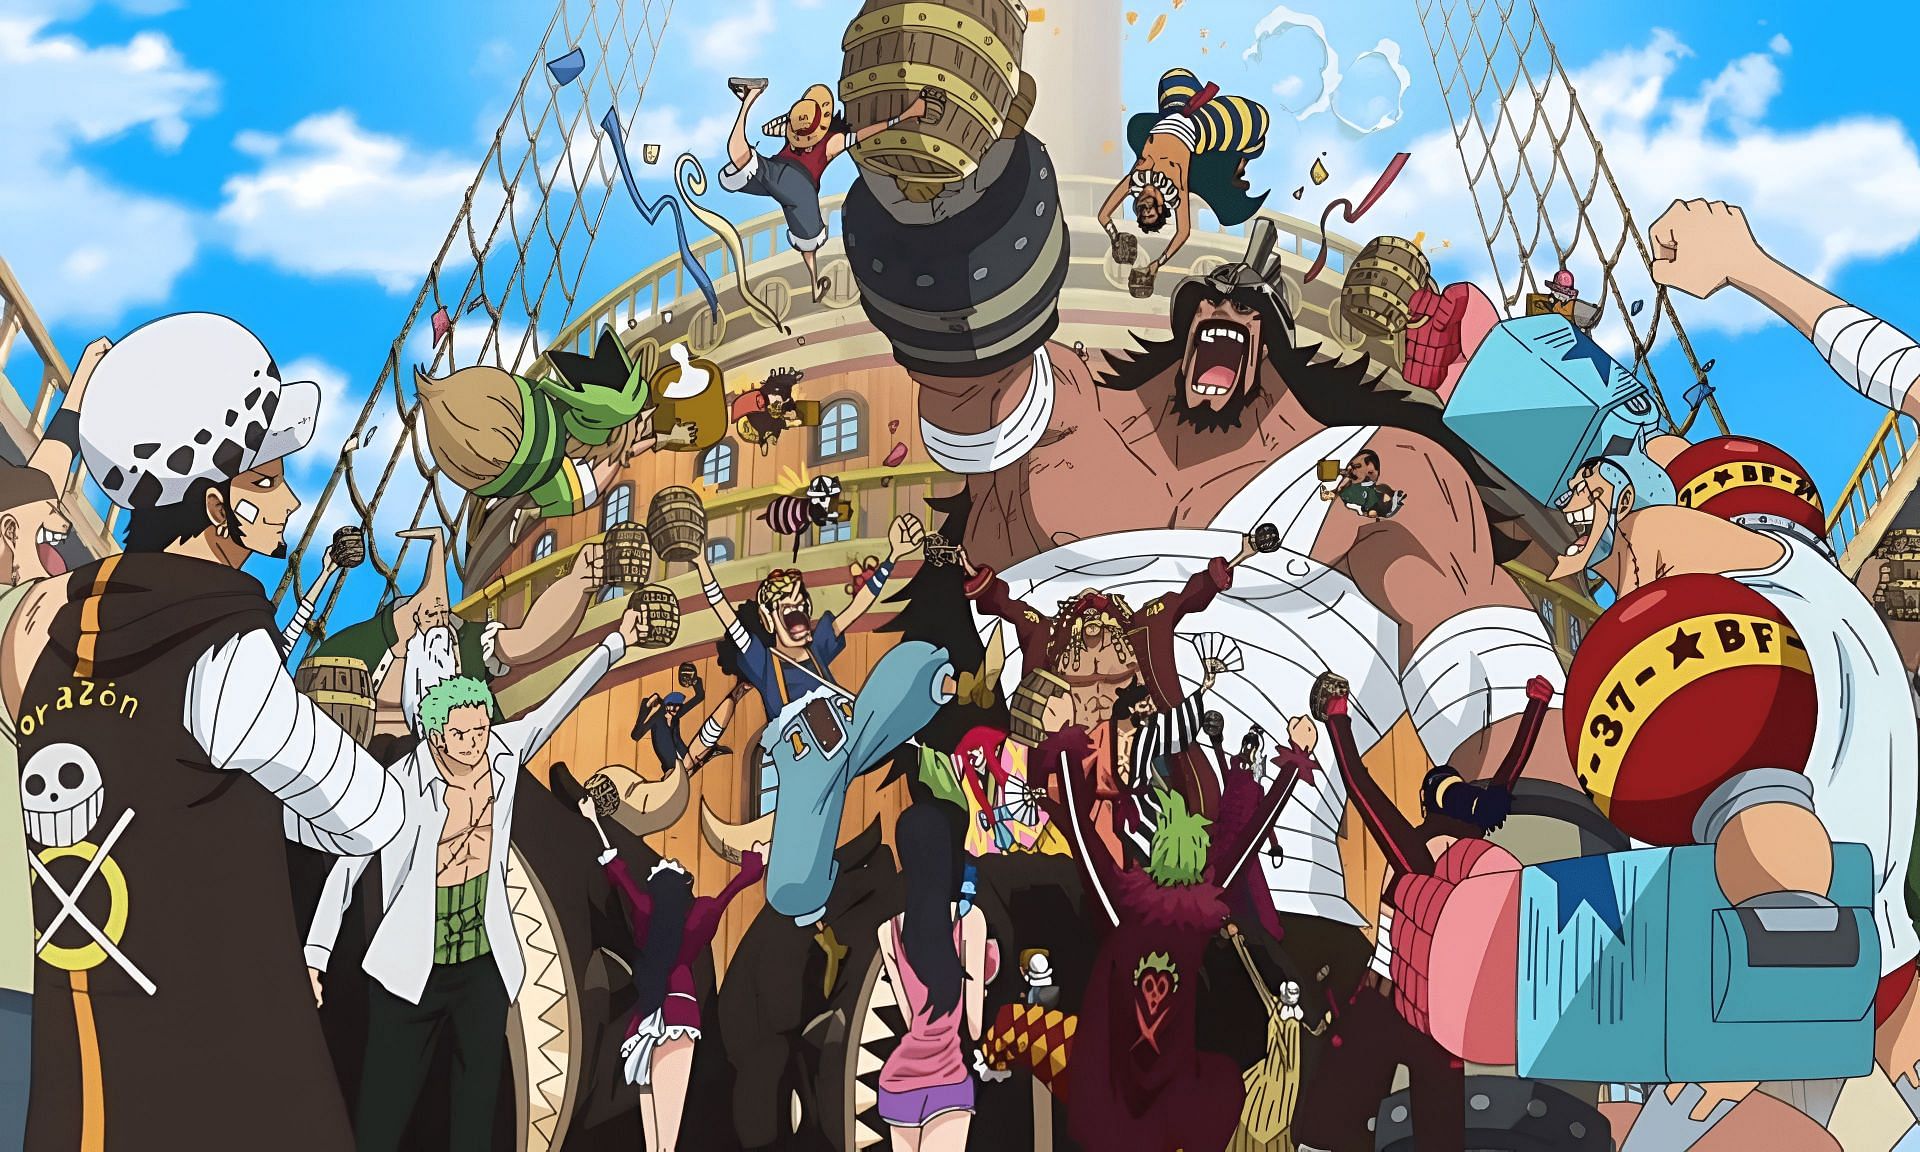 The Straw Hat Grand Fleet as seen in the anime (Image via Toei Animation)